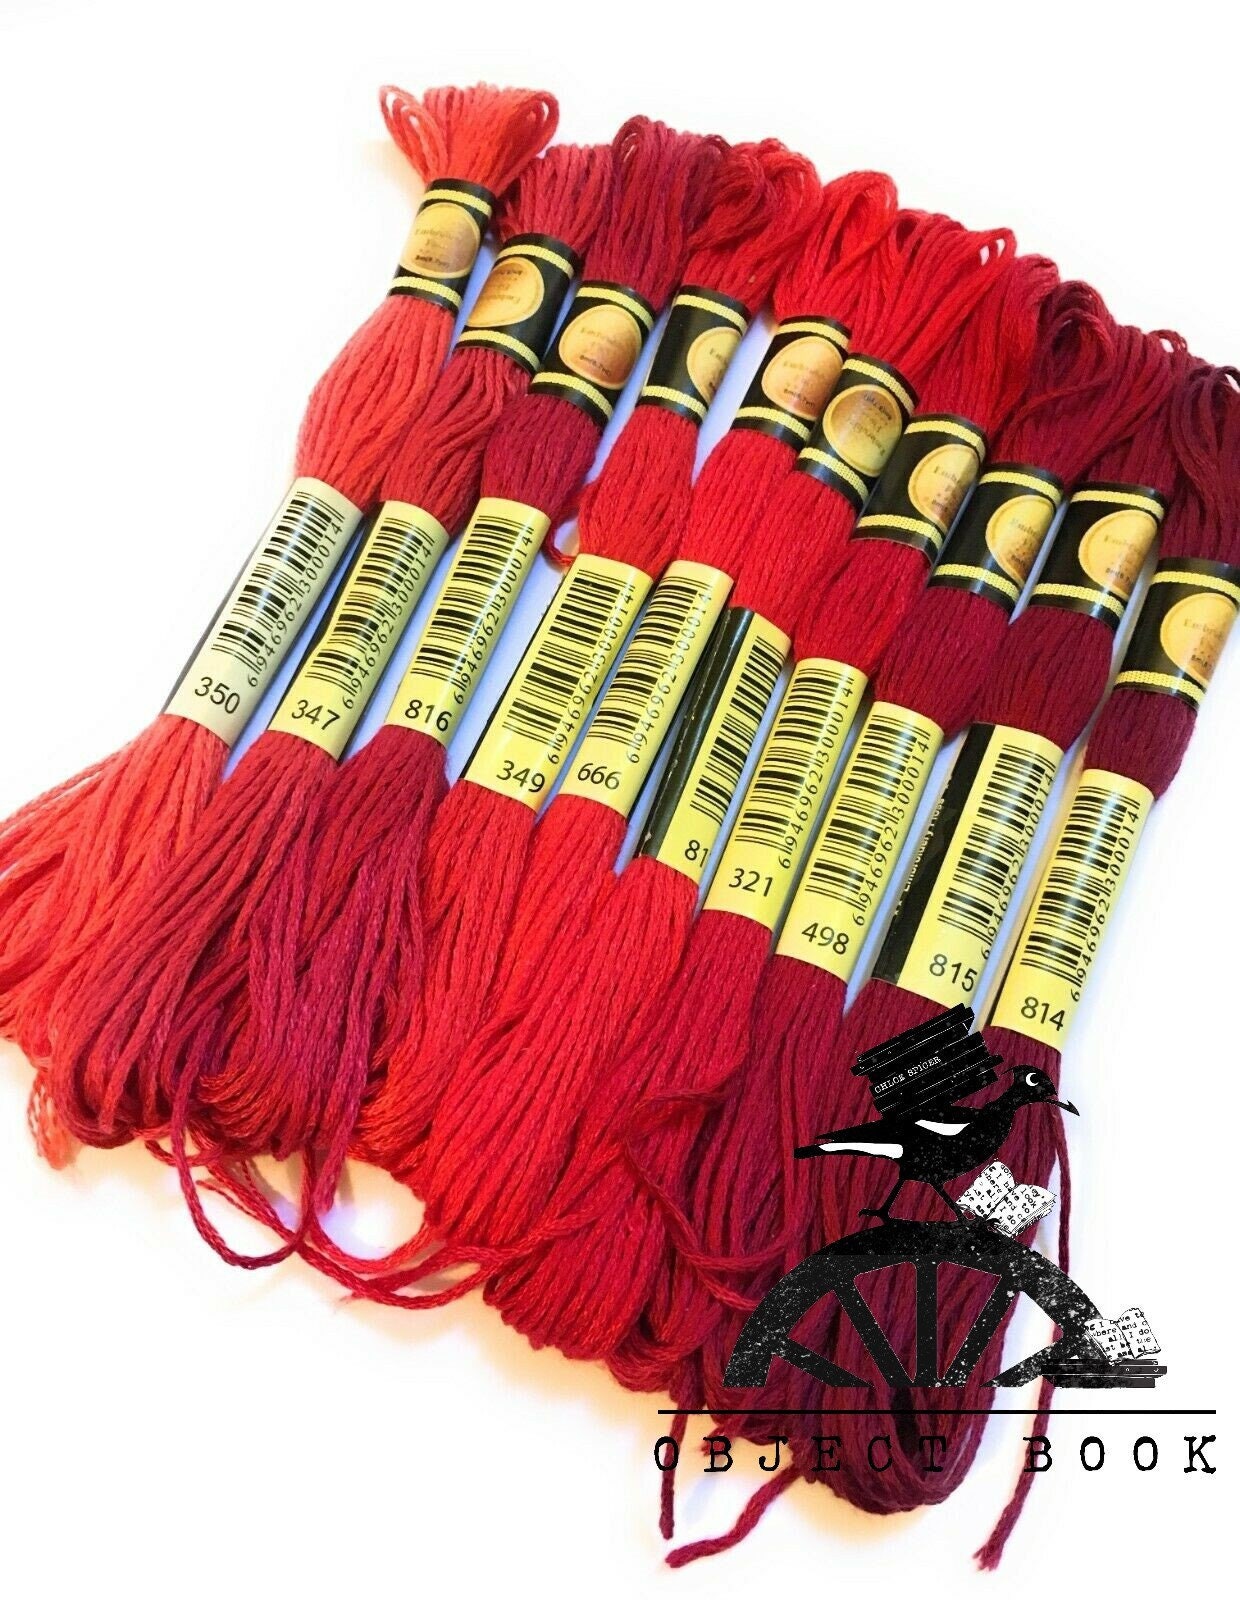 Thread - Red #321 DMC Embroidery Floss - 8 Meter Skein